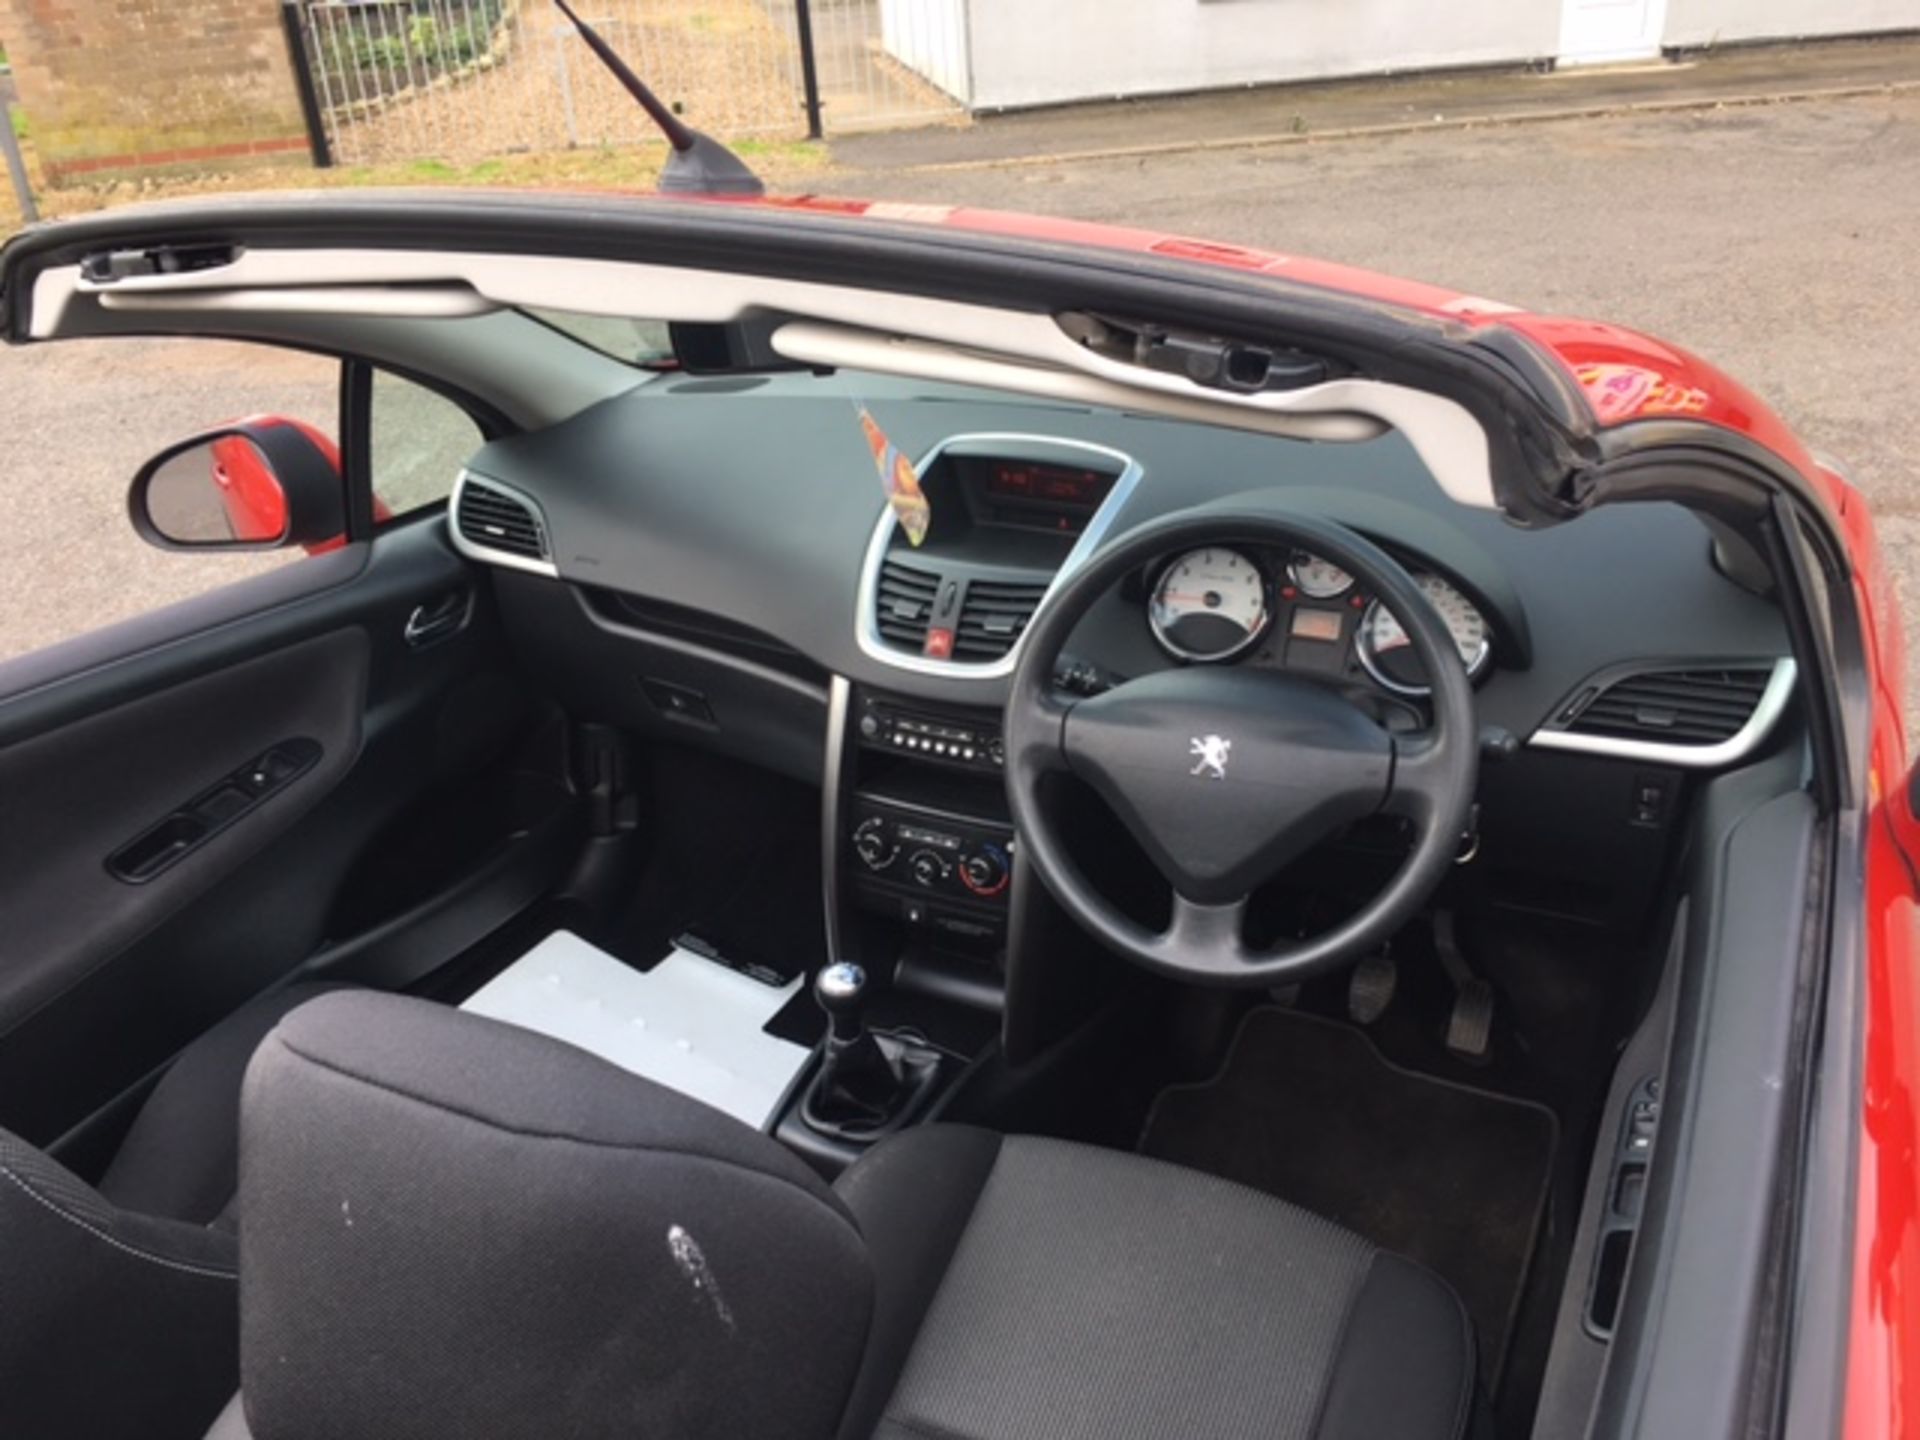 Peugeot 207 Sports Convertible 1598Cc - No VAT on Hammer - Image 7 of 12